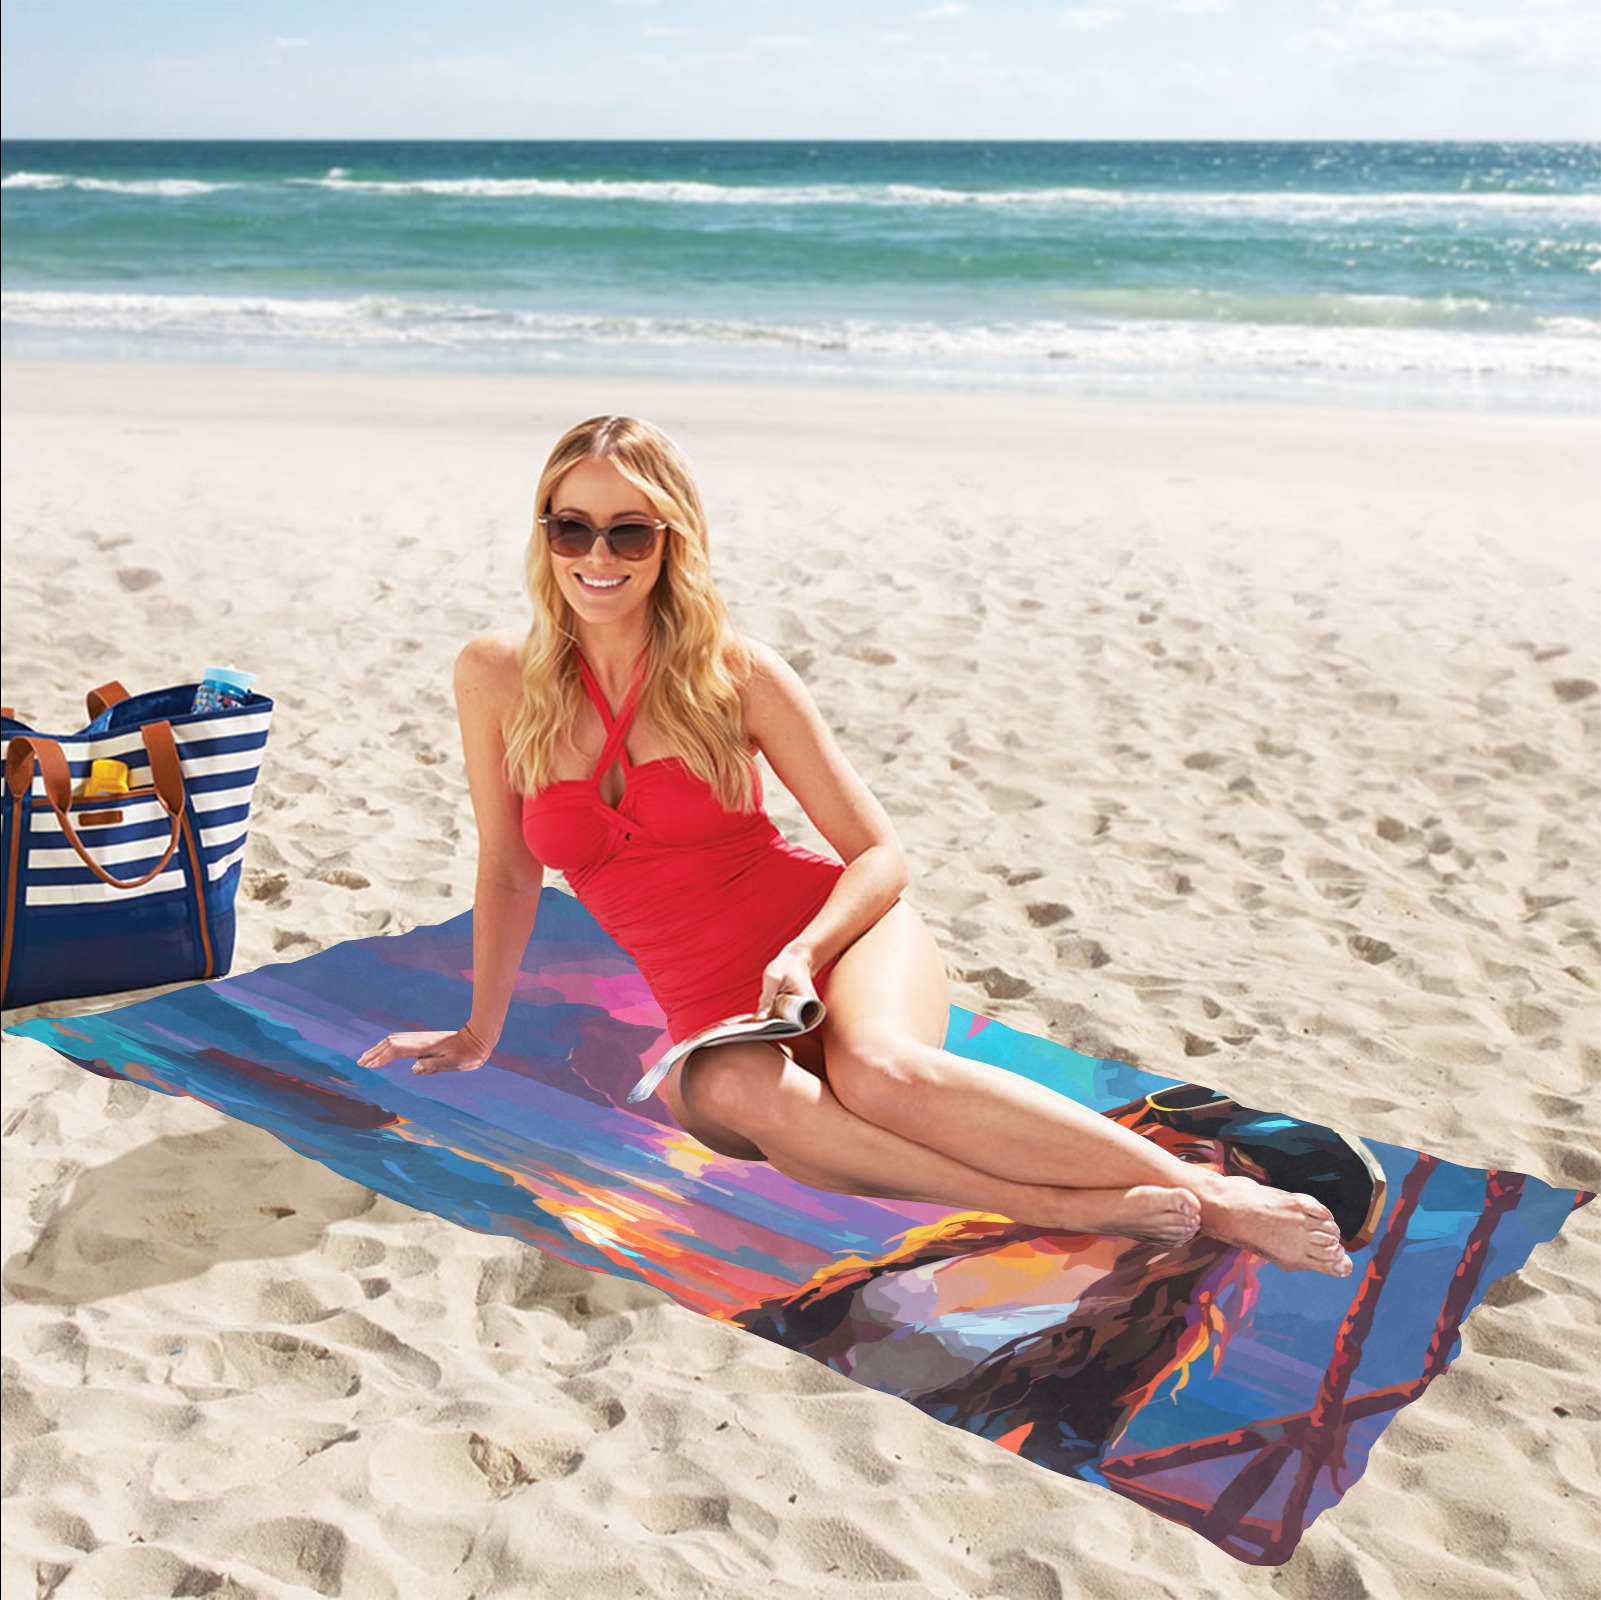 Pirate girl dreaming by the ocean at purple sunset Beach Towel 32"x 71"